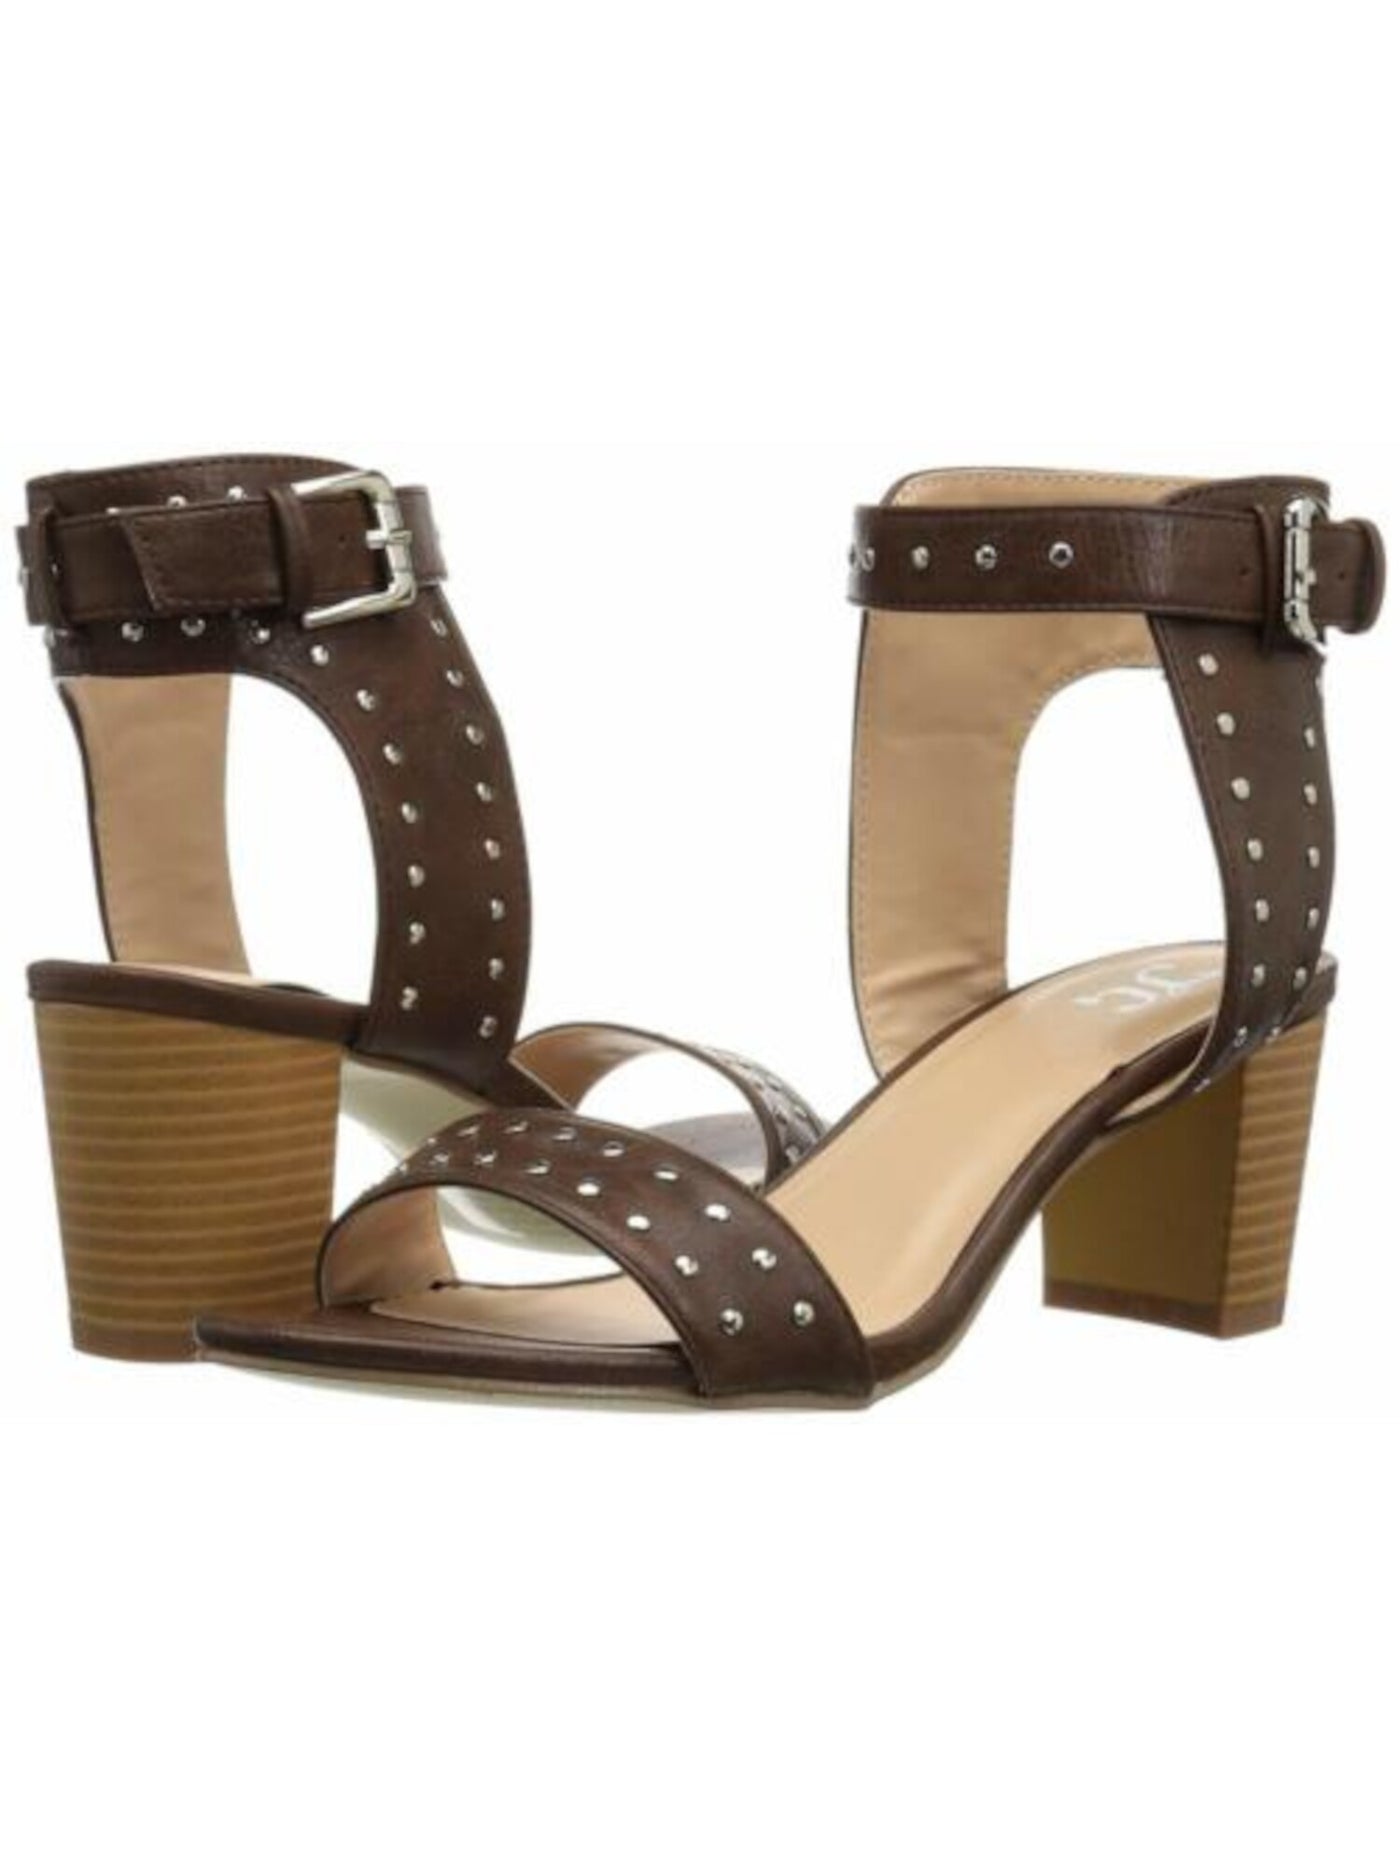 JOURNEE COLLECTION Womens Brown Studded Ankle Strap Mabel Almond Toe Block Heel Buckle Heeled Gladiator Sandal M